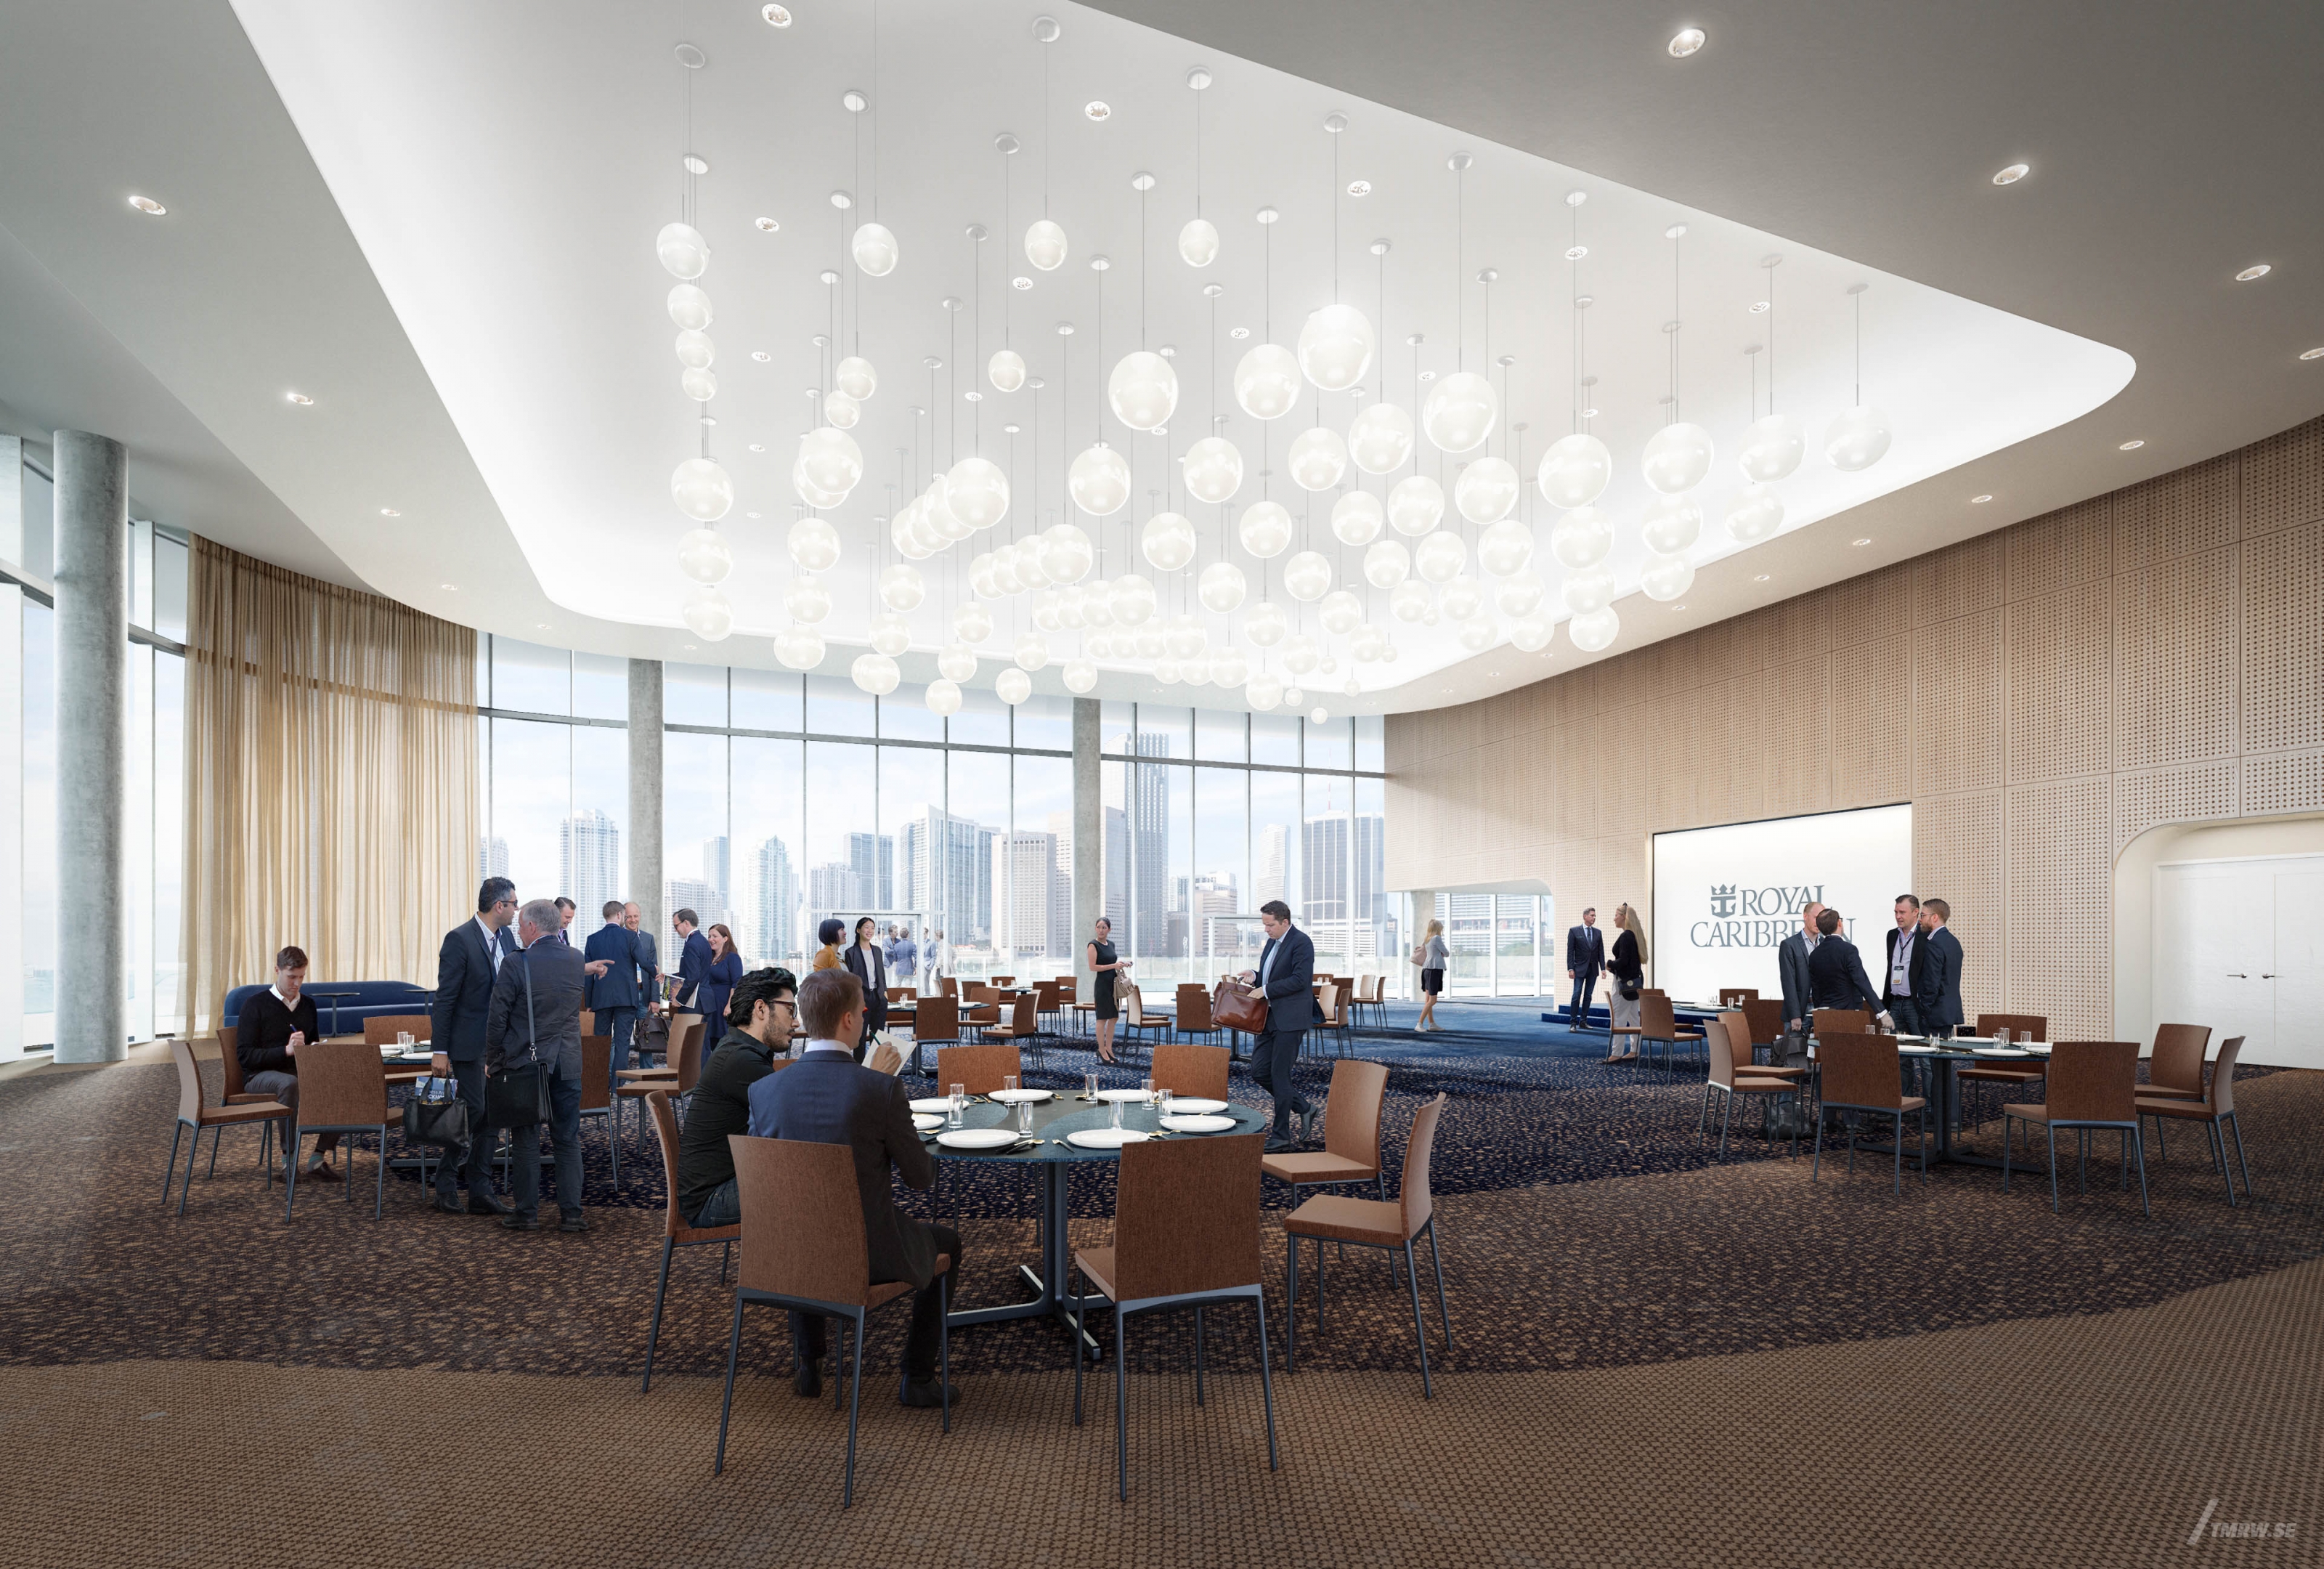 Architectural visualization of Royal Caribbean for HOK, interior of a conference room in daylight